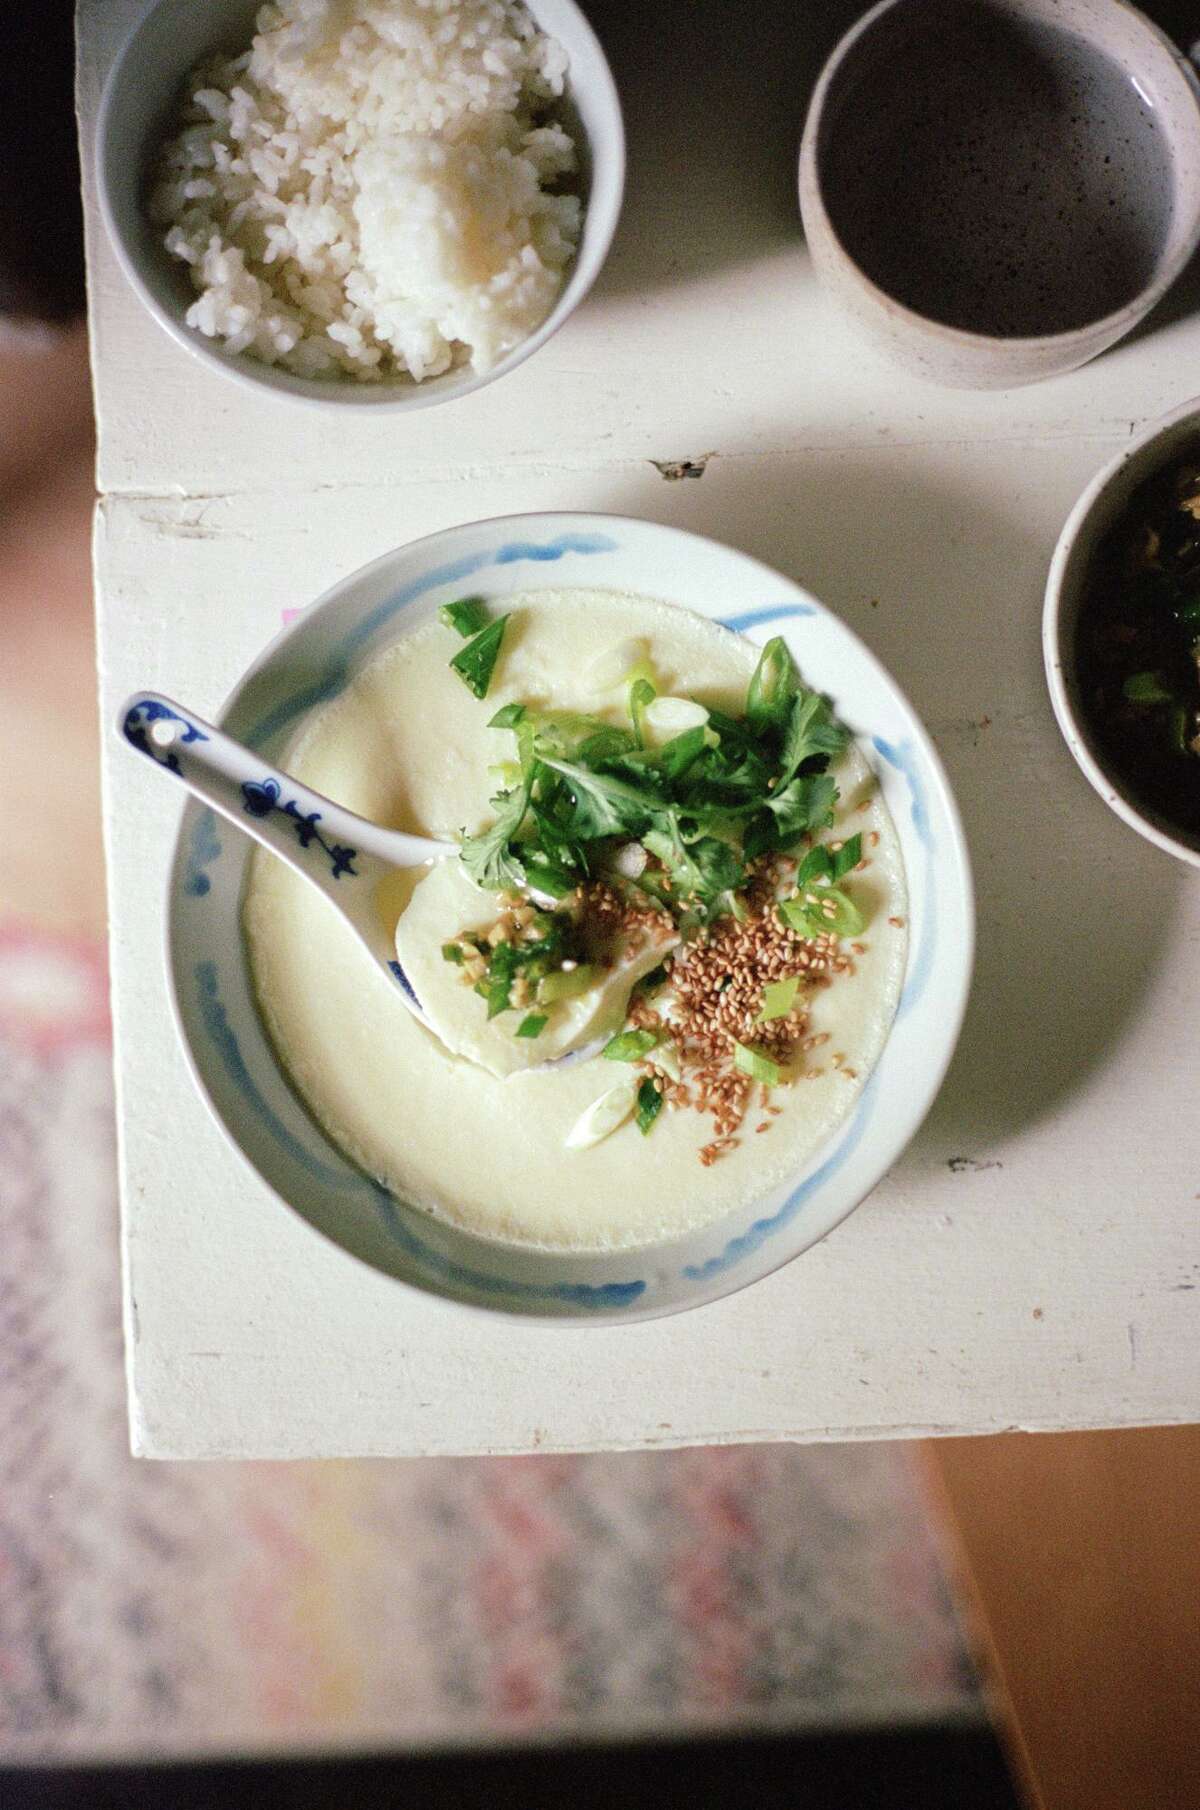 Steamed egg custard from "To Asia, With Love" by Hetty McKinnon (Prestel Publishing).